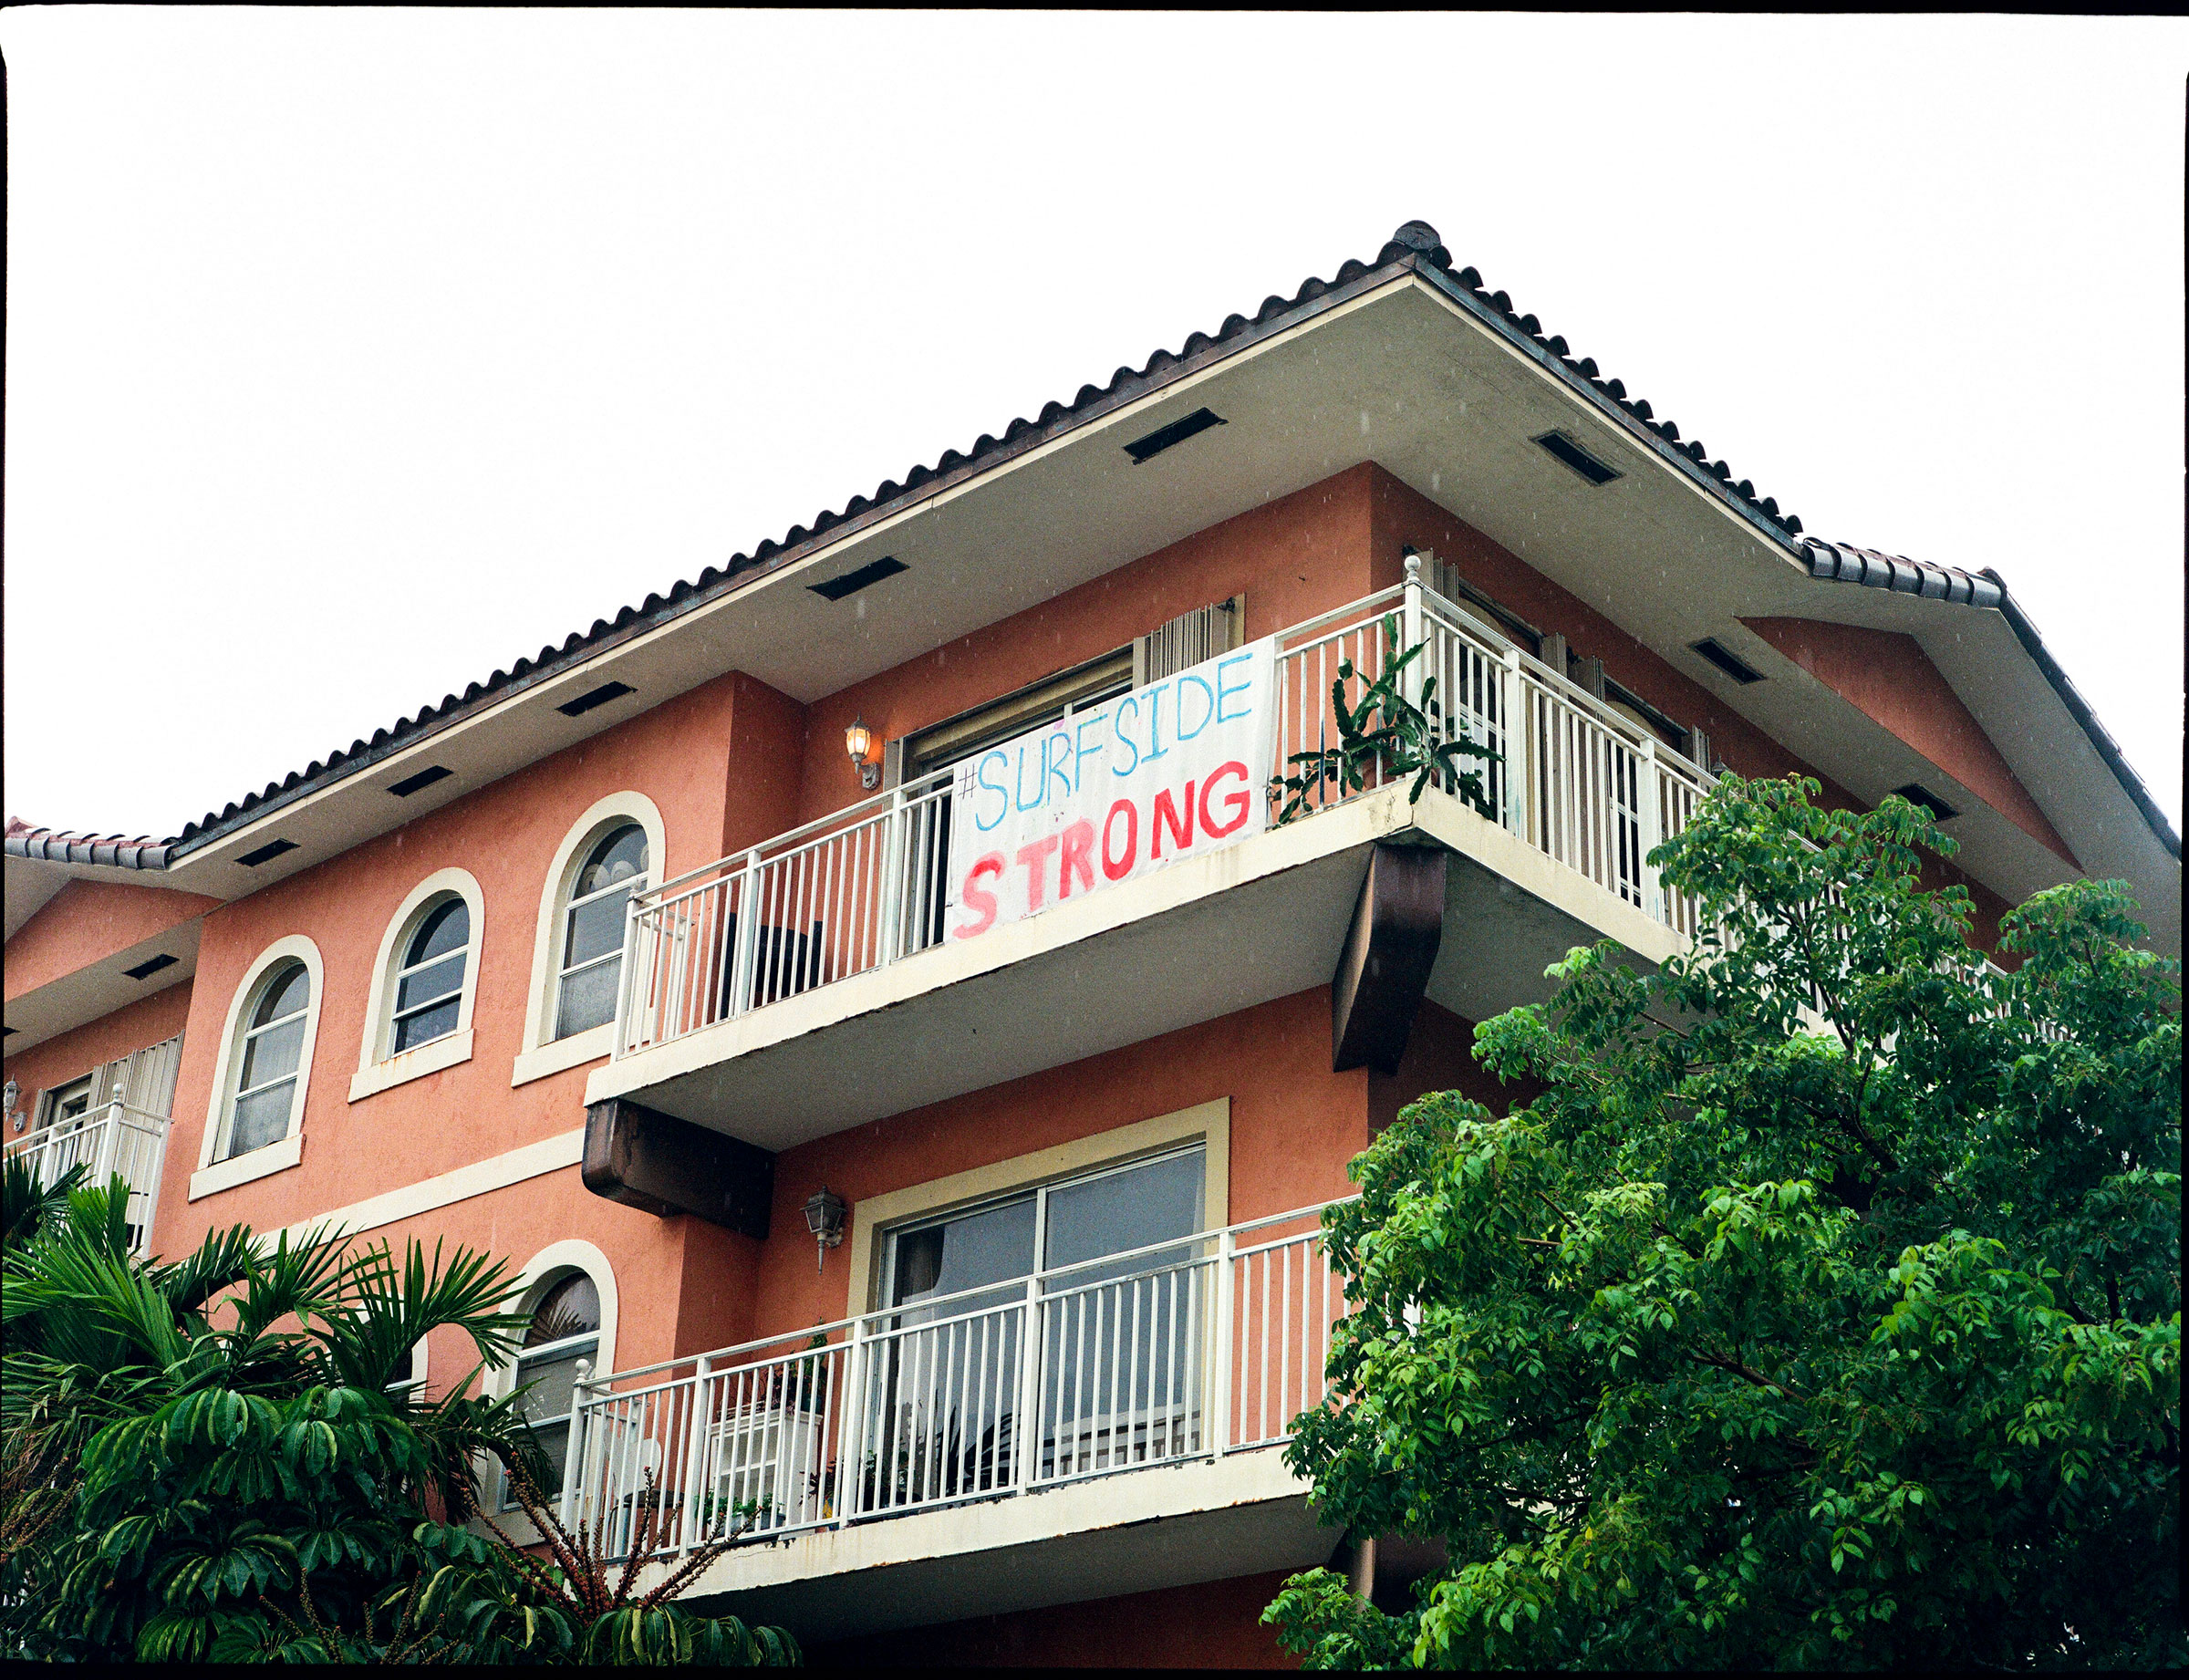 A sign hangs off of the balcony of a nearby apartment building that reads "Surfside Strong".